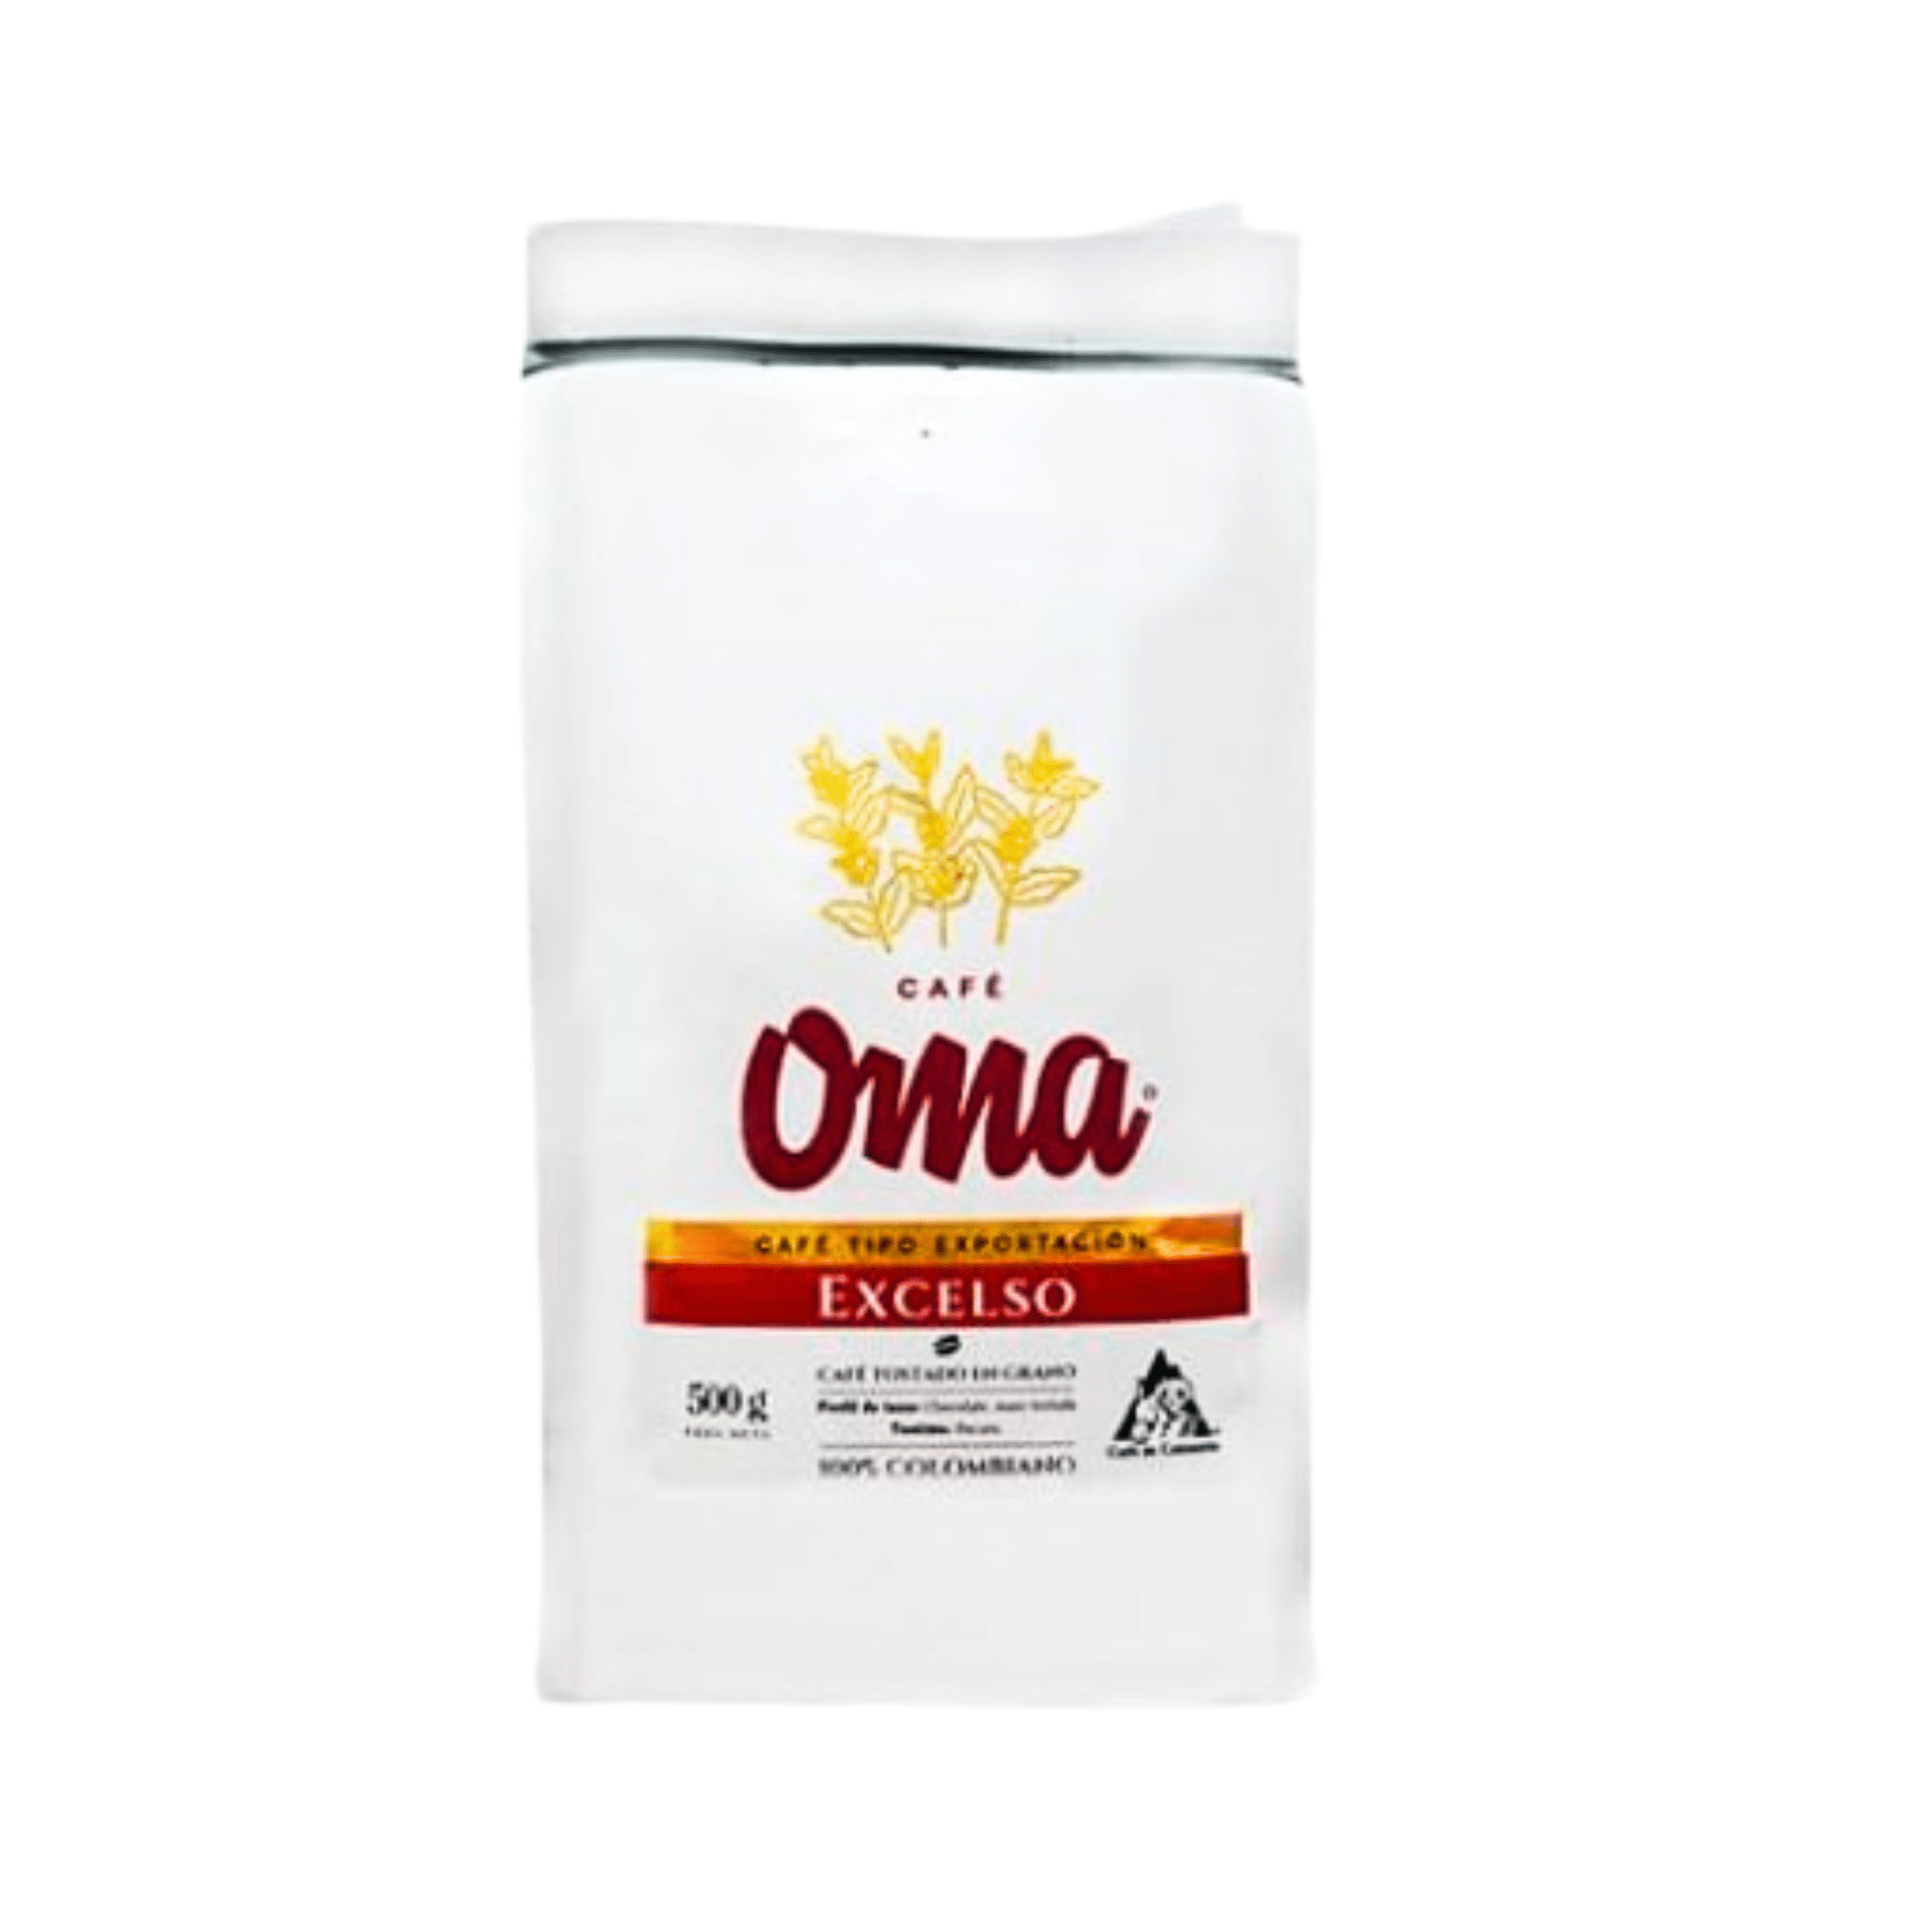 OMA Coffee Excelso - Colombian Coffee